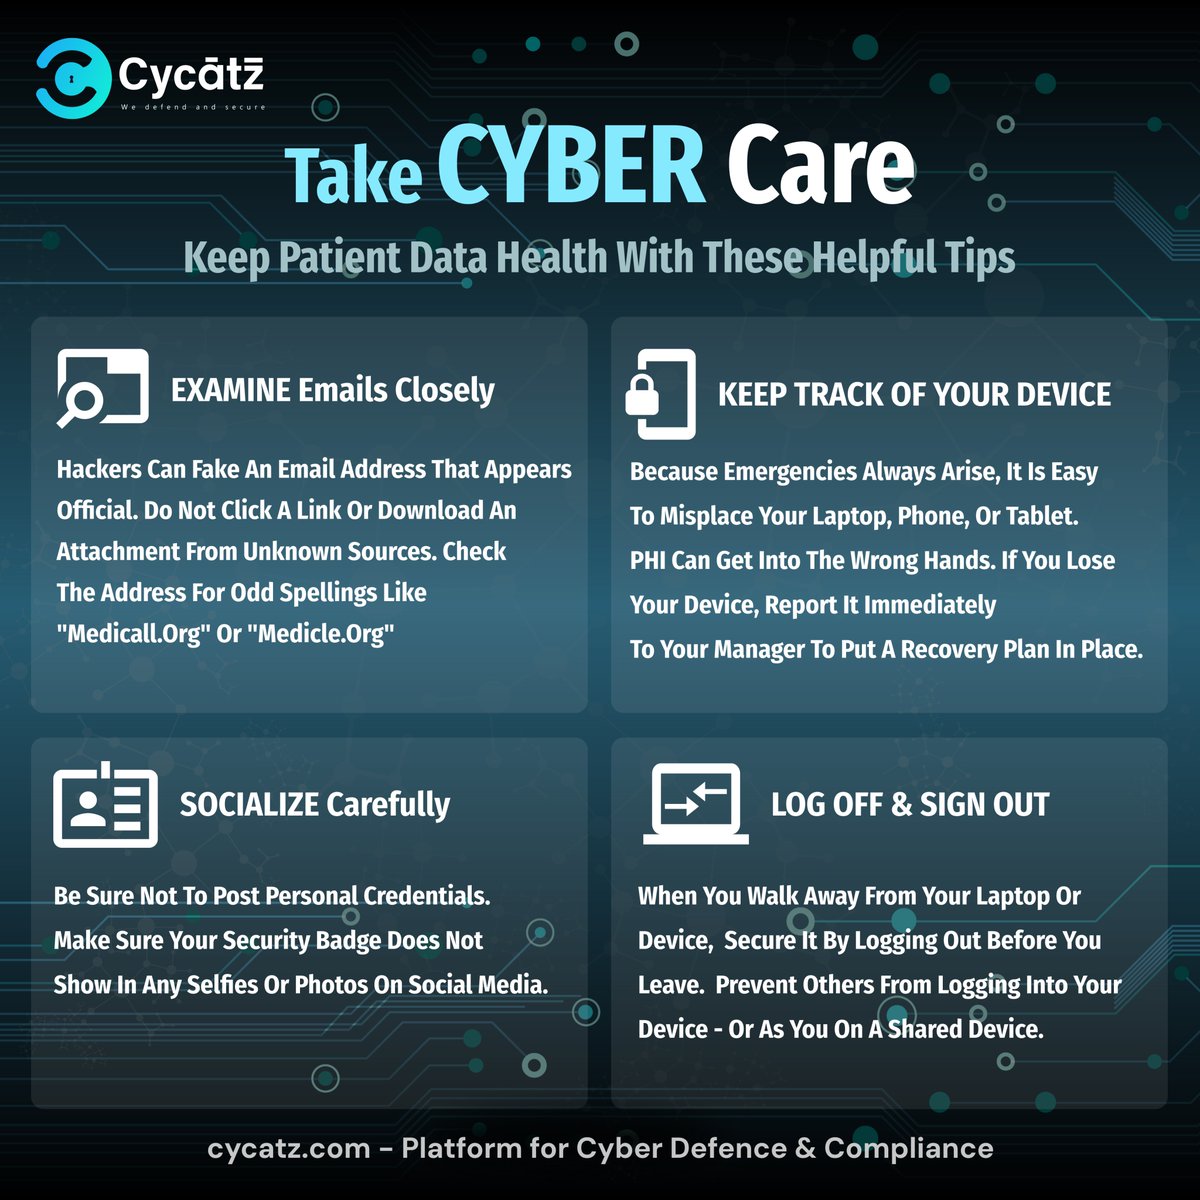 #CyCatz #Cybersecurity Take Cyber Care Keep Patient Data Health With these helpful Tips

#cyberawareness #cyberattack #databreaches #cybercrime #darkwebmonitoring #SurfaceWebMonitoring #mobilesecurity #emailsecurity #vendorriskmanagement #BrandMonitoring #cyber #care #tips